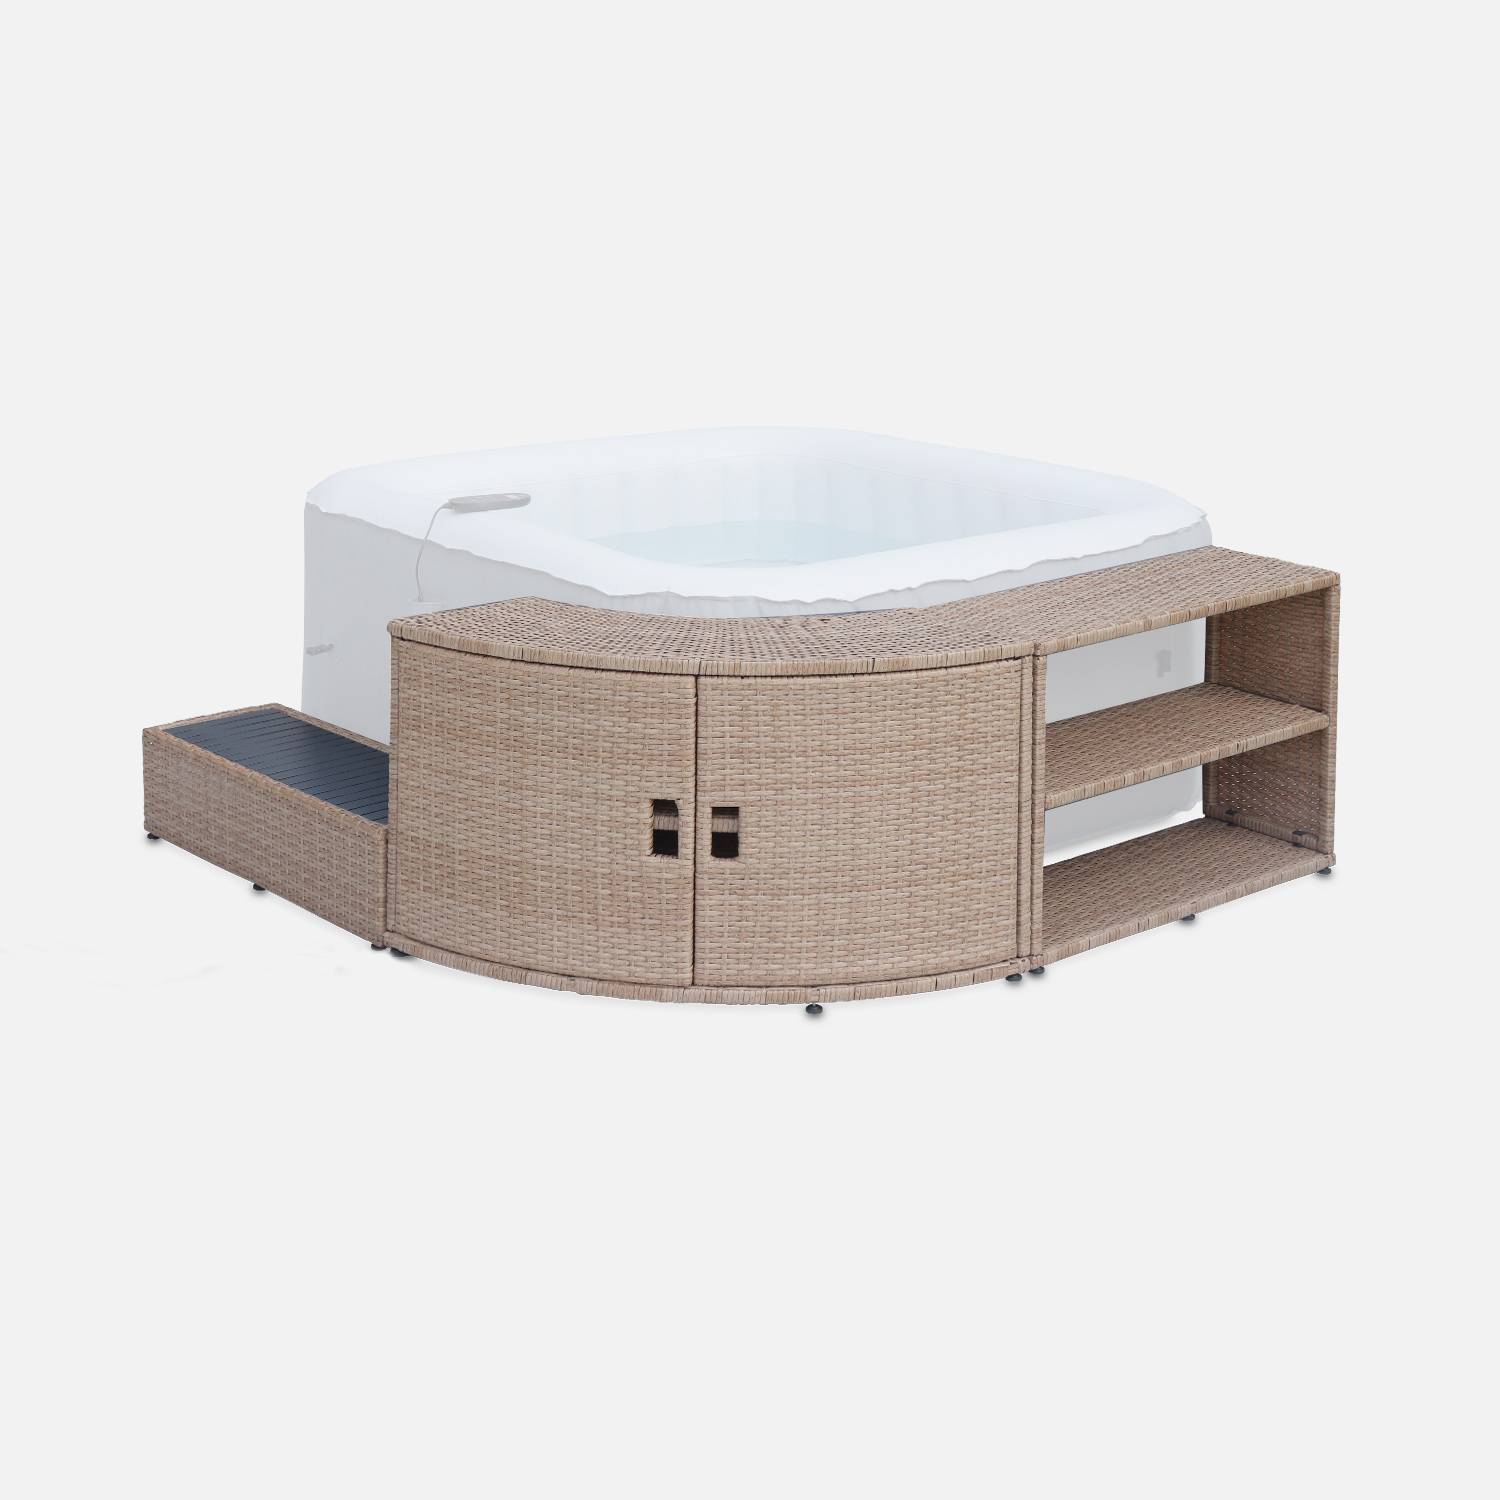 Natural polyrattan surround for square hot tub with cabinet, shelf and footstep Photo1